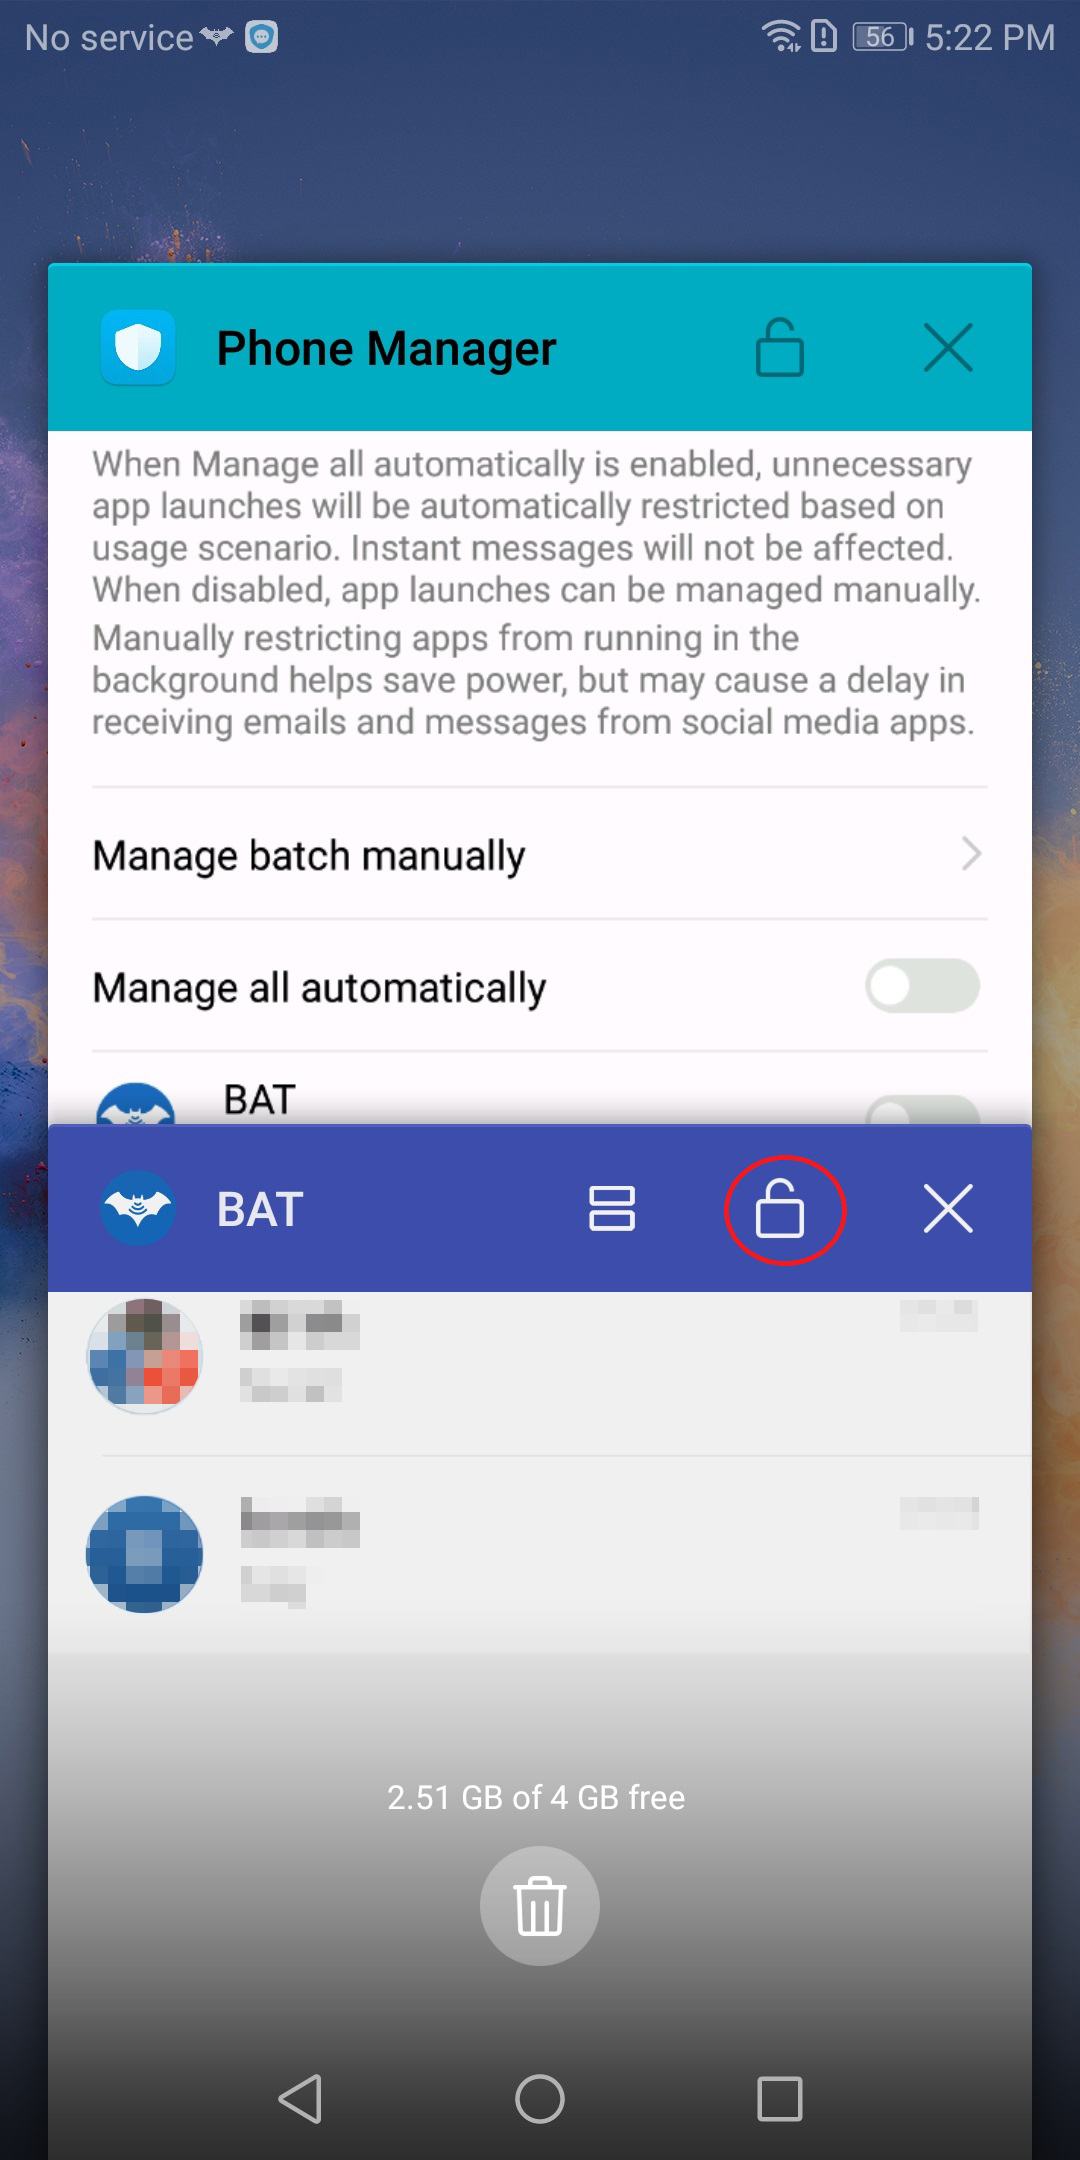 Click Multi-task button and locate Bat Messenger App on the Popups